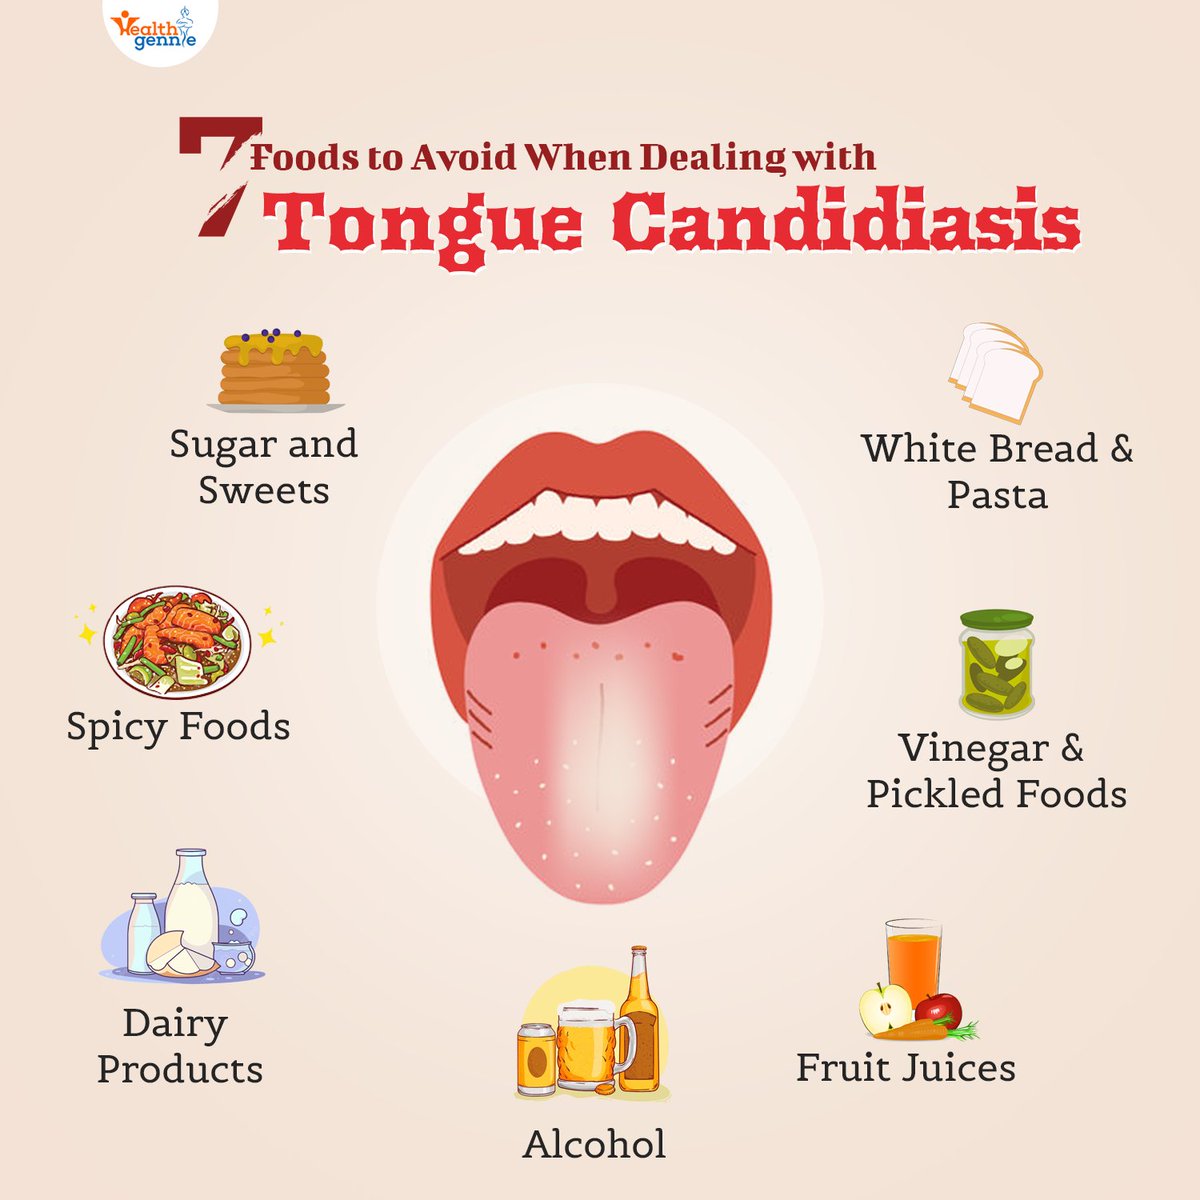 🚫 Dealing with tongue candidiasis? Here are 7 foods to steer clear of. Remember, a balanced diet is key to managing candidiasis! 🥦🍋🥕 

#candidiasisawareness #healthyeating #tonguecandidiasis #balanceddiet #sugarandsweets #healthgennie #whitebreadpasta @healthgennie1